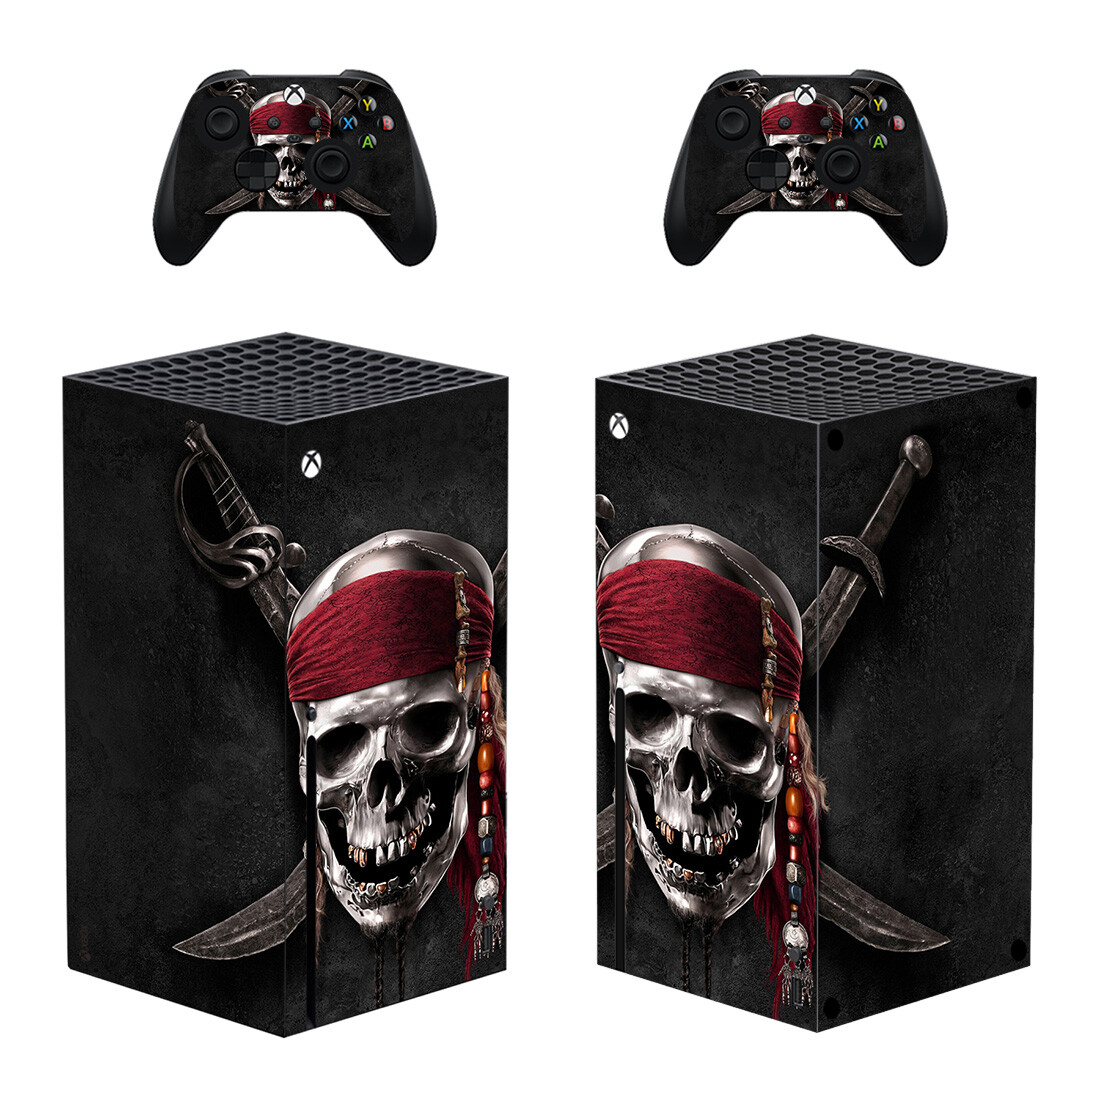 Pirates Of The Caribbean Xbox Series X Skin Sticker Decal